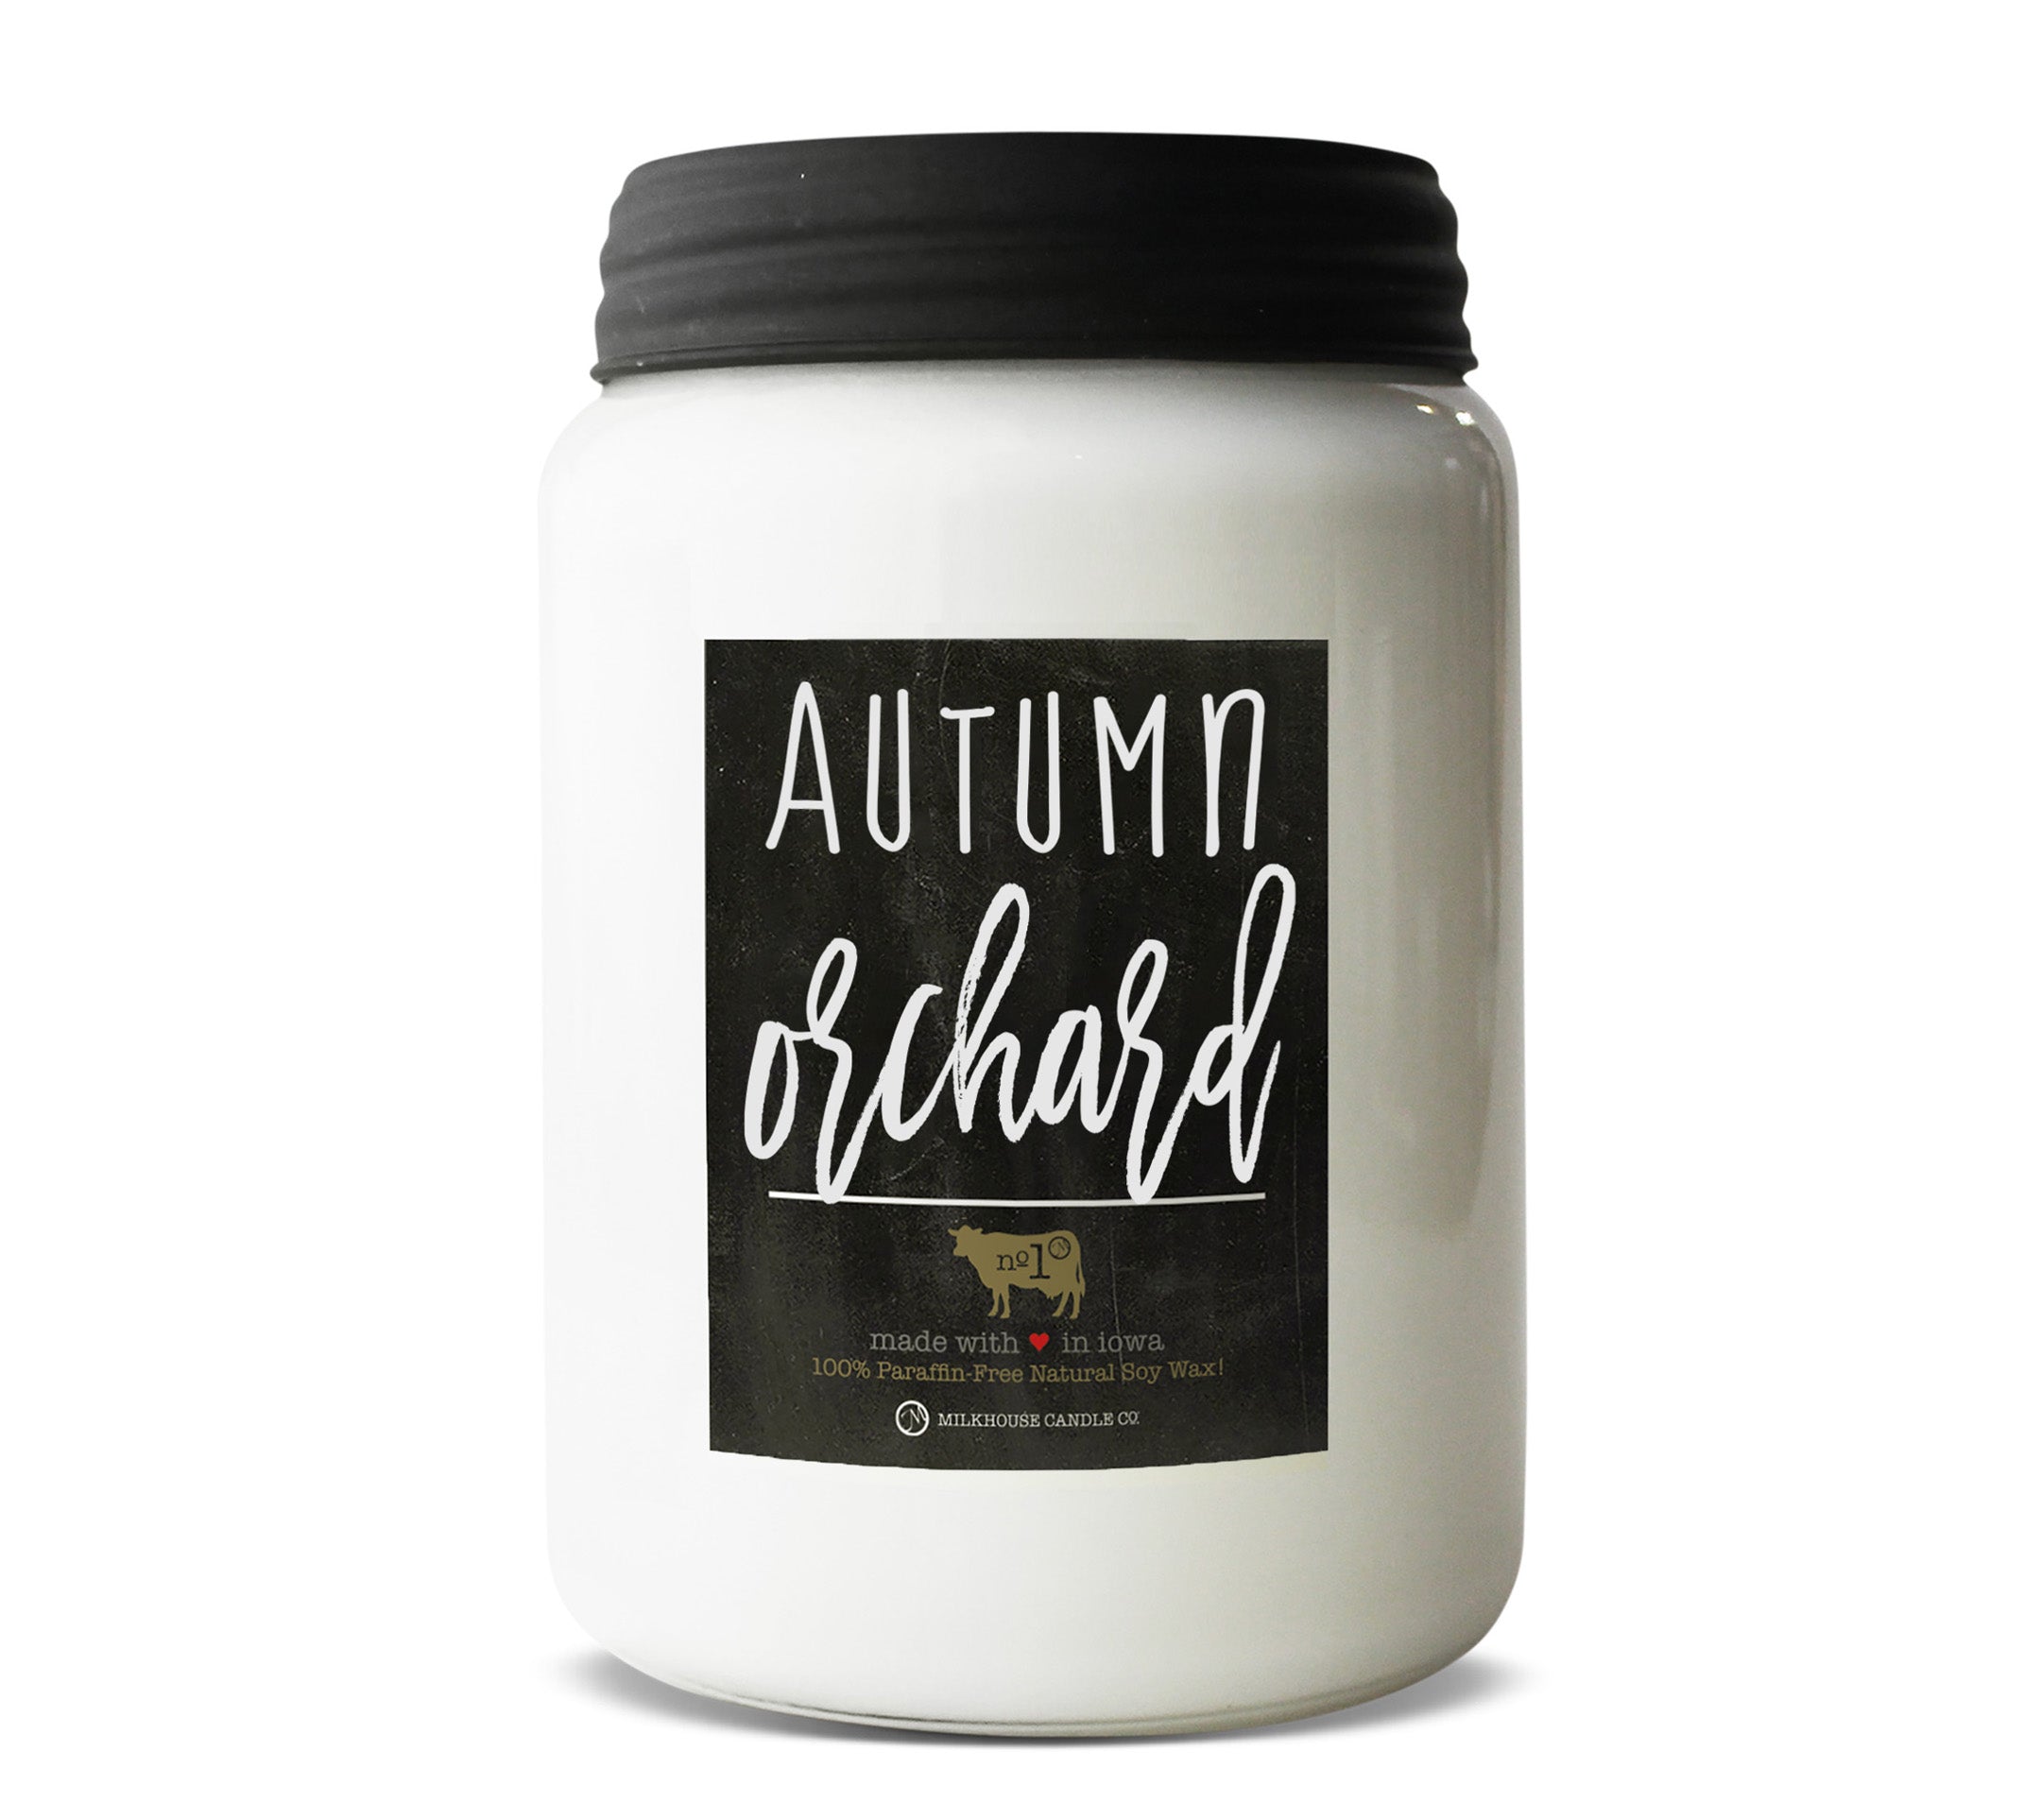 Autumn Orchard 26oz Farmhouse Jar Candle by Milkhouse Candle Co.